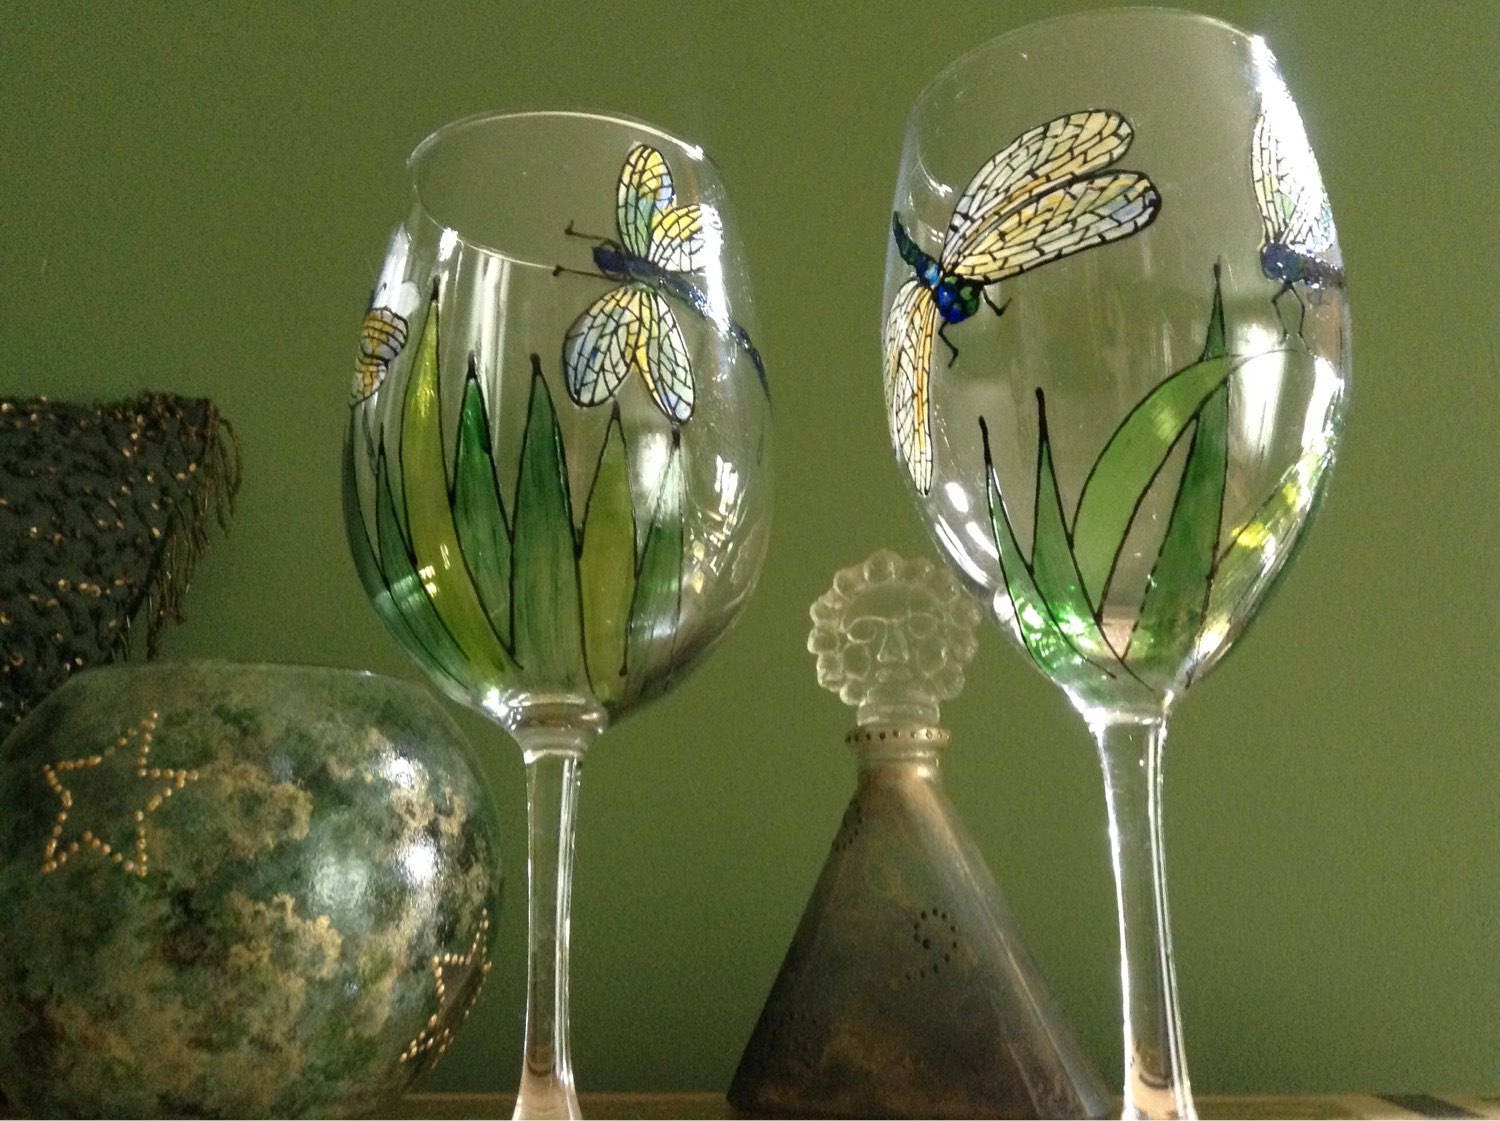 “Dragonfly Summer” Hand Painted Wine Glass Gift